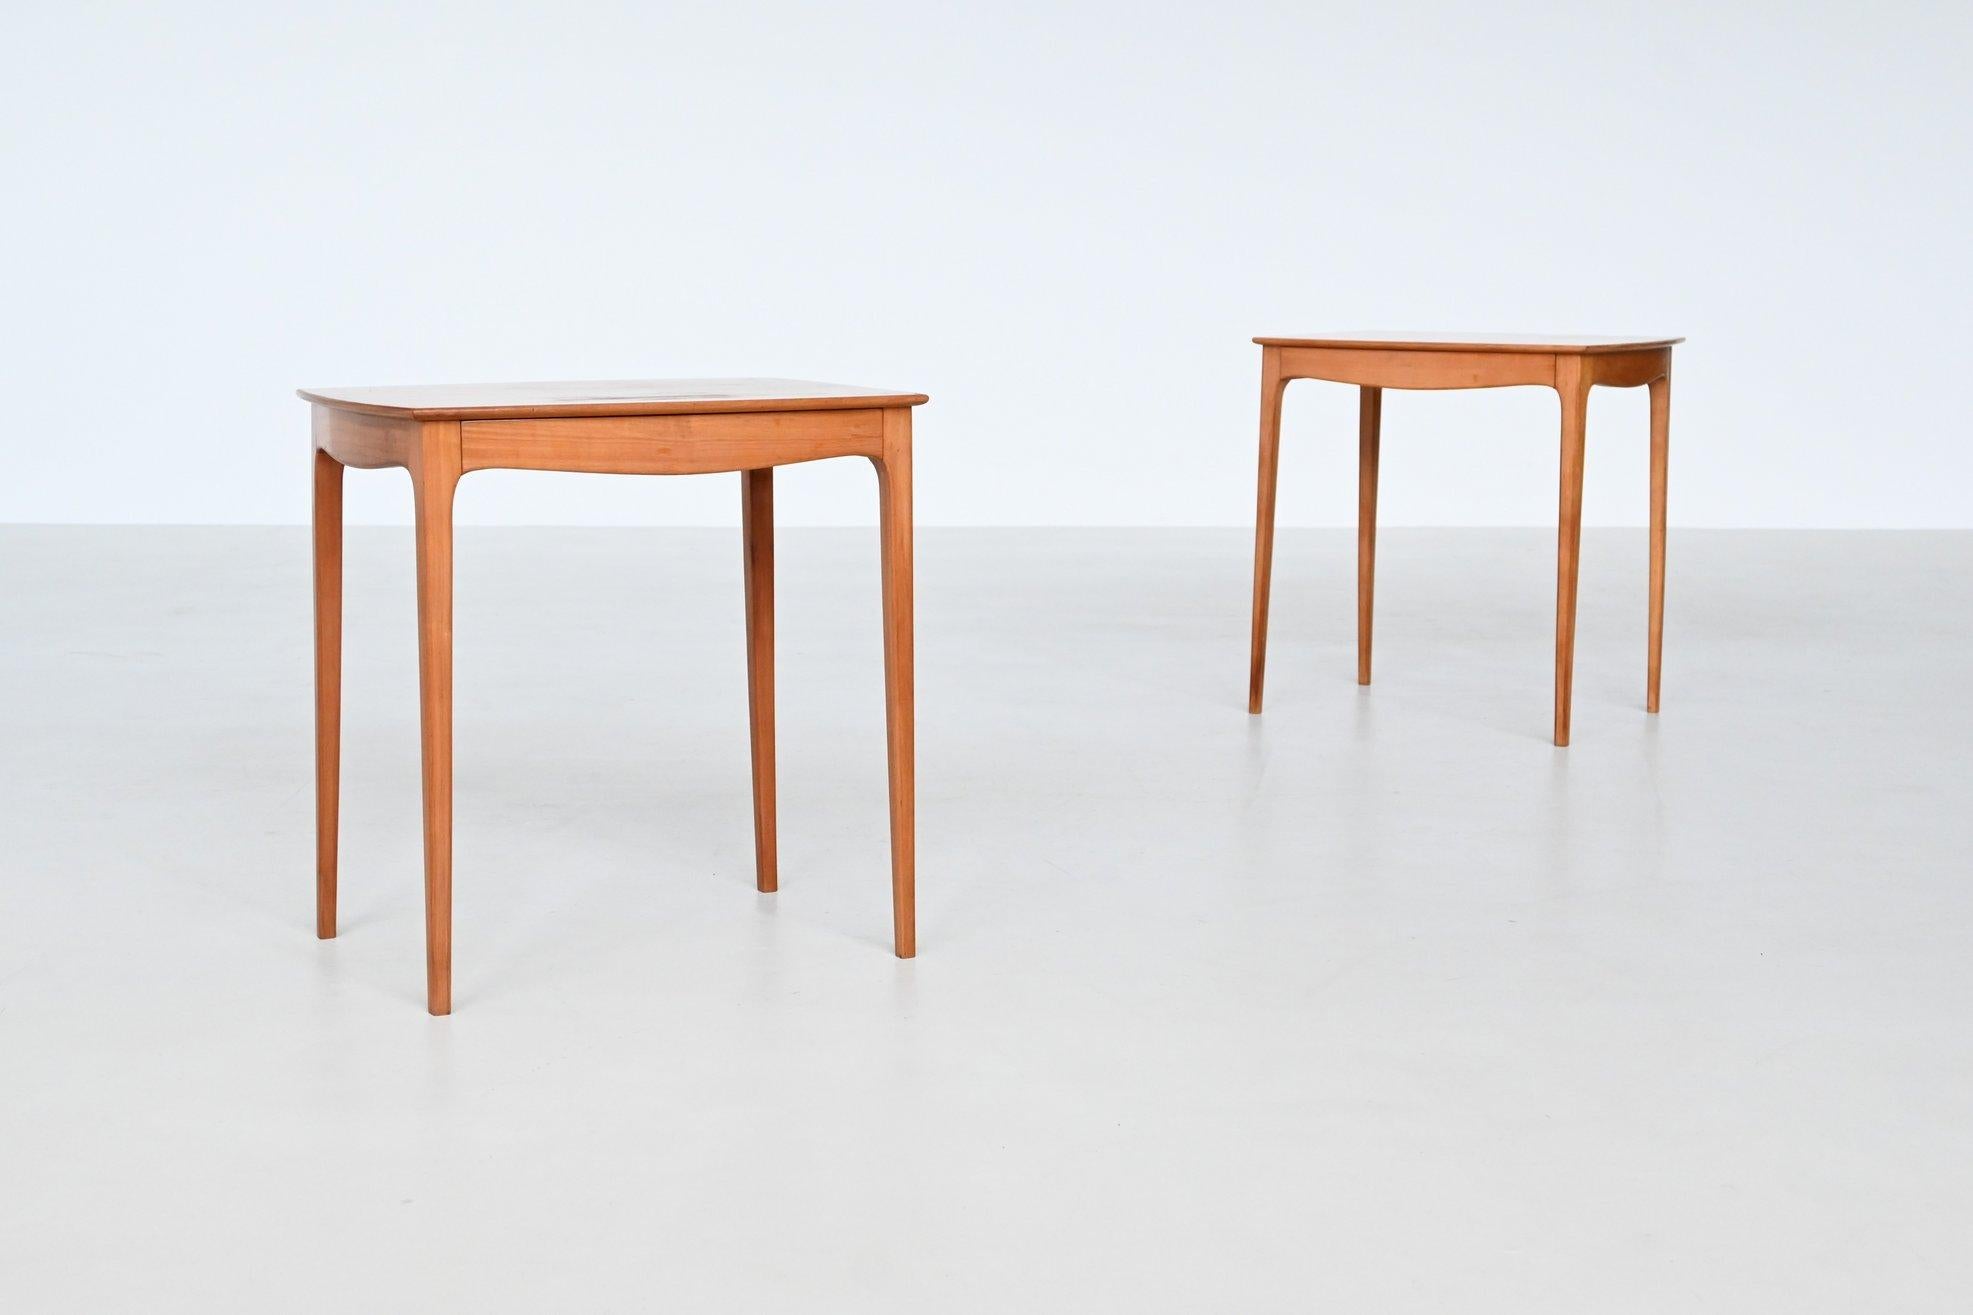 Beautiful pair of nightstands designed and manufactured by Bosteels Meubelen in Sint-Niklaas, Belgium 1960. These very nice elegant shaped side tables or nightstands are made of cherry wood. This remarkable set holds a strong expression and is